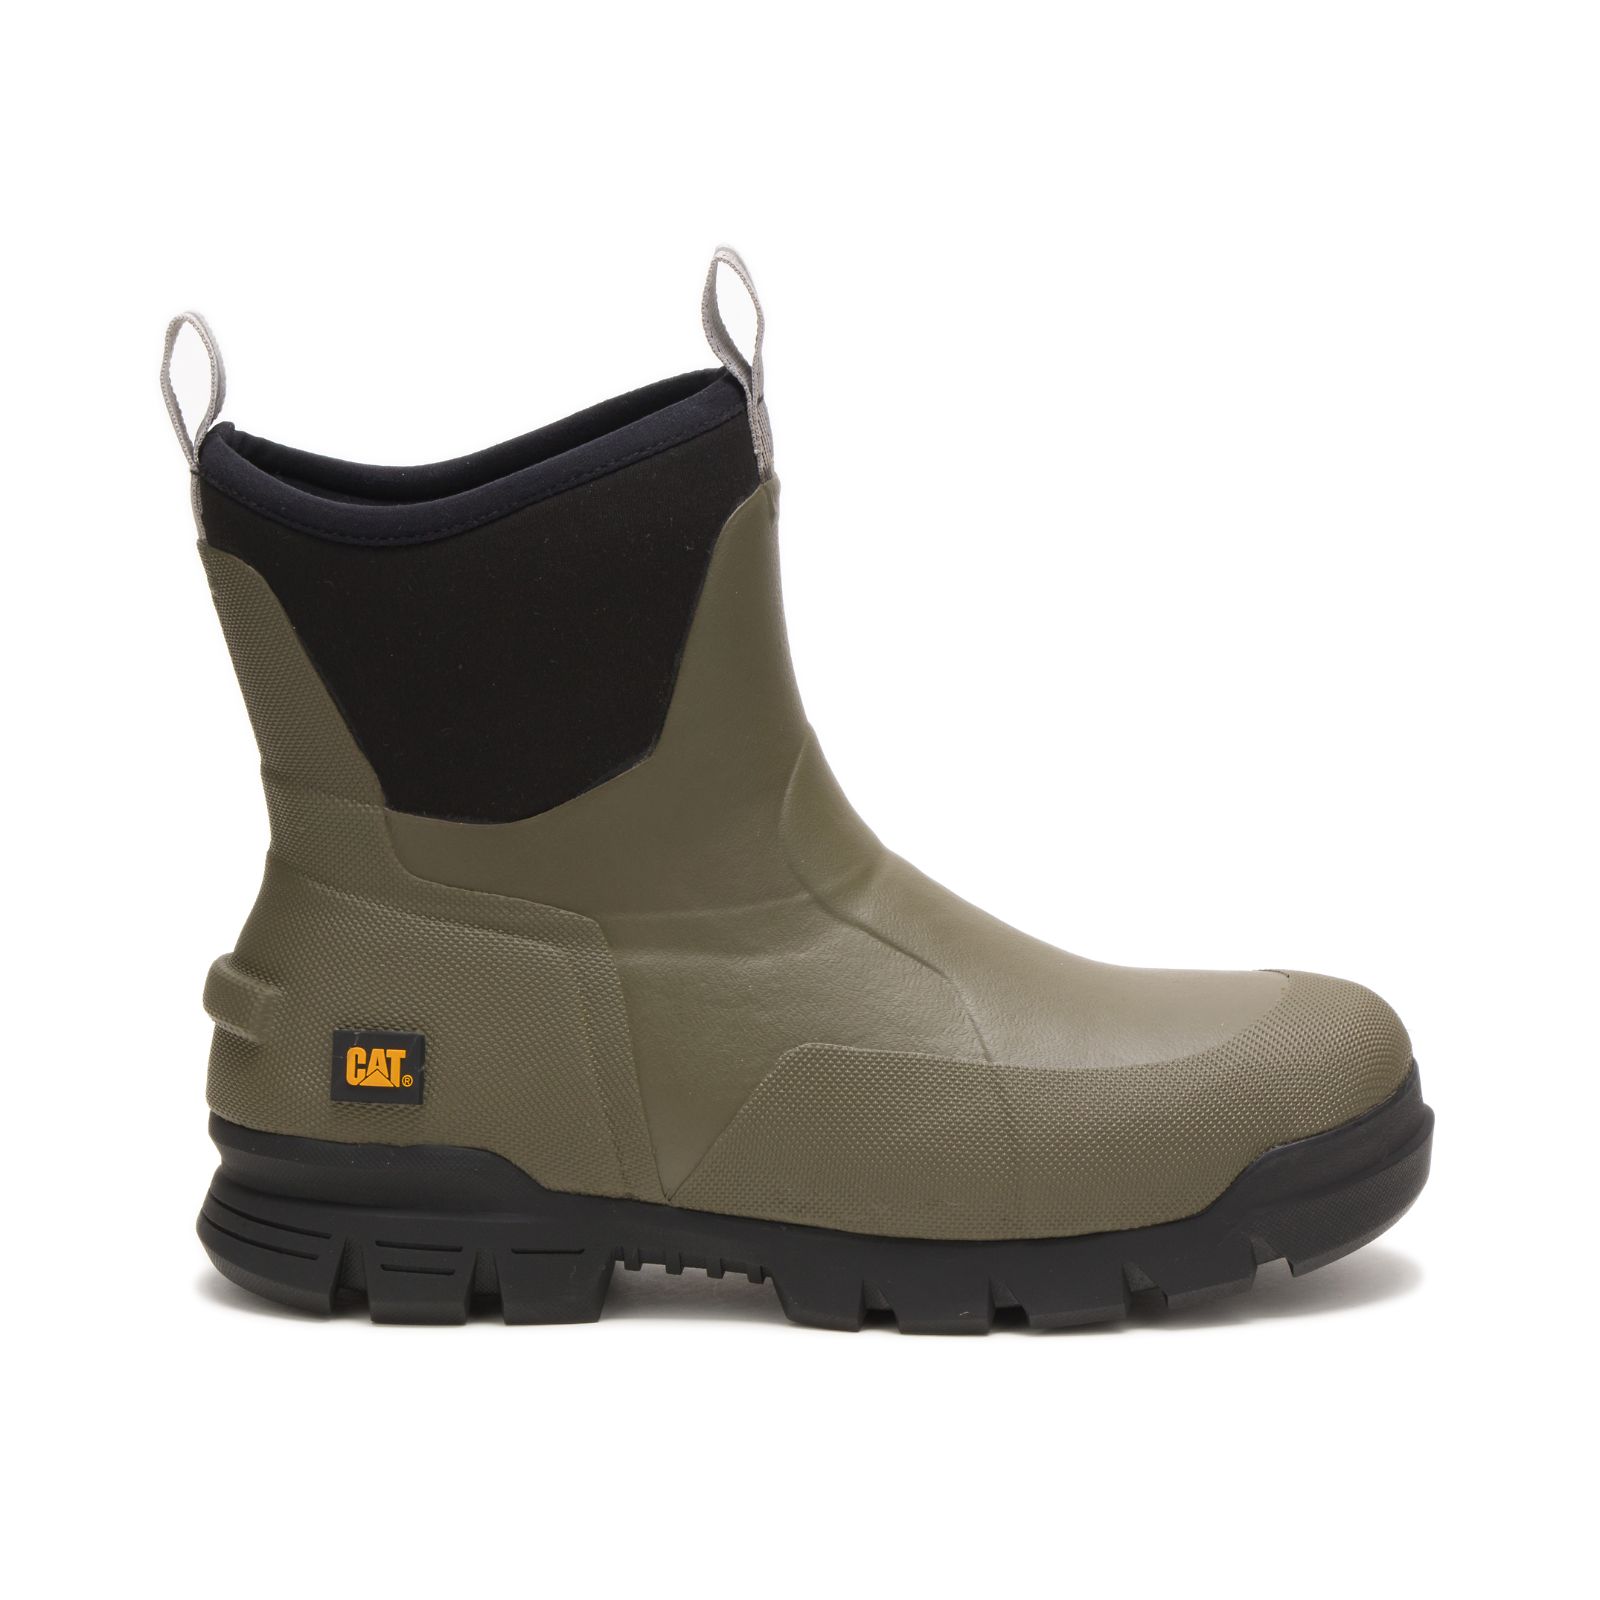 Caterpillar Rubber Boots UAE Online - Caterpillar Stormers 6" Mens - Olive PZNSIA605